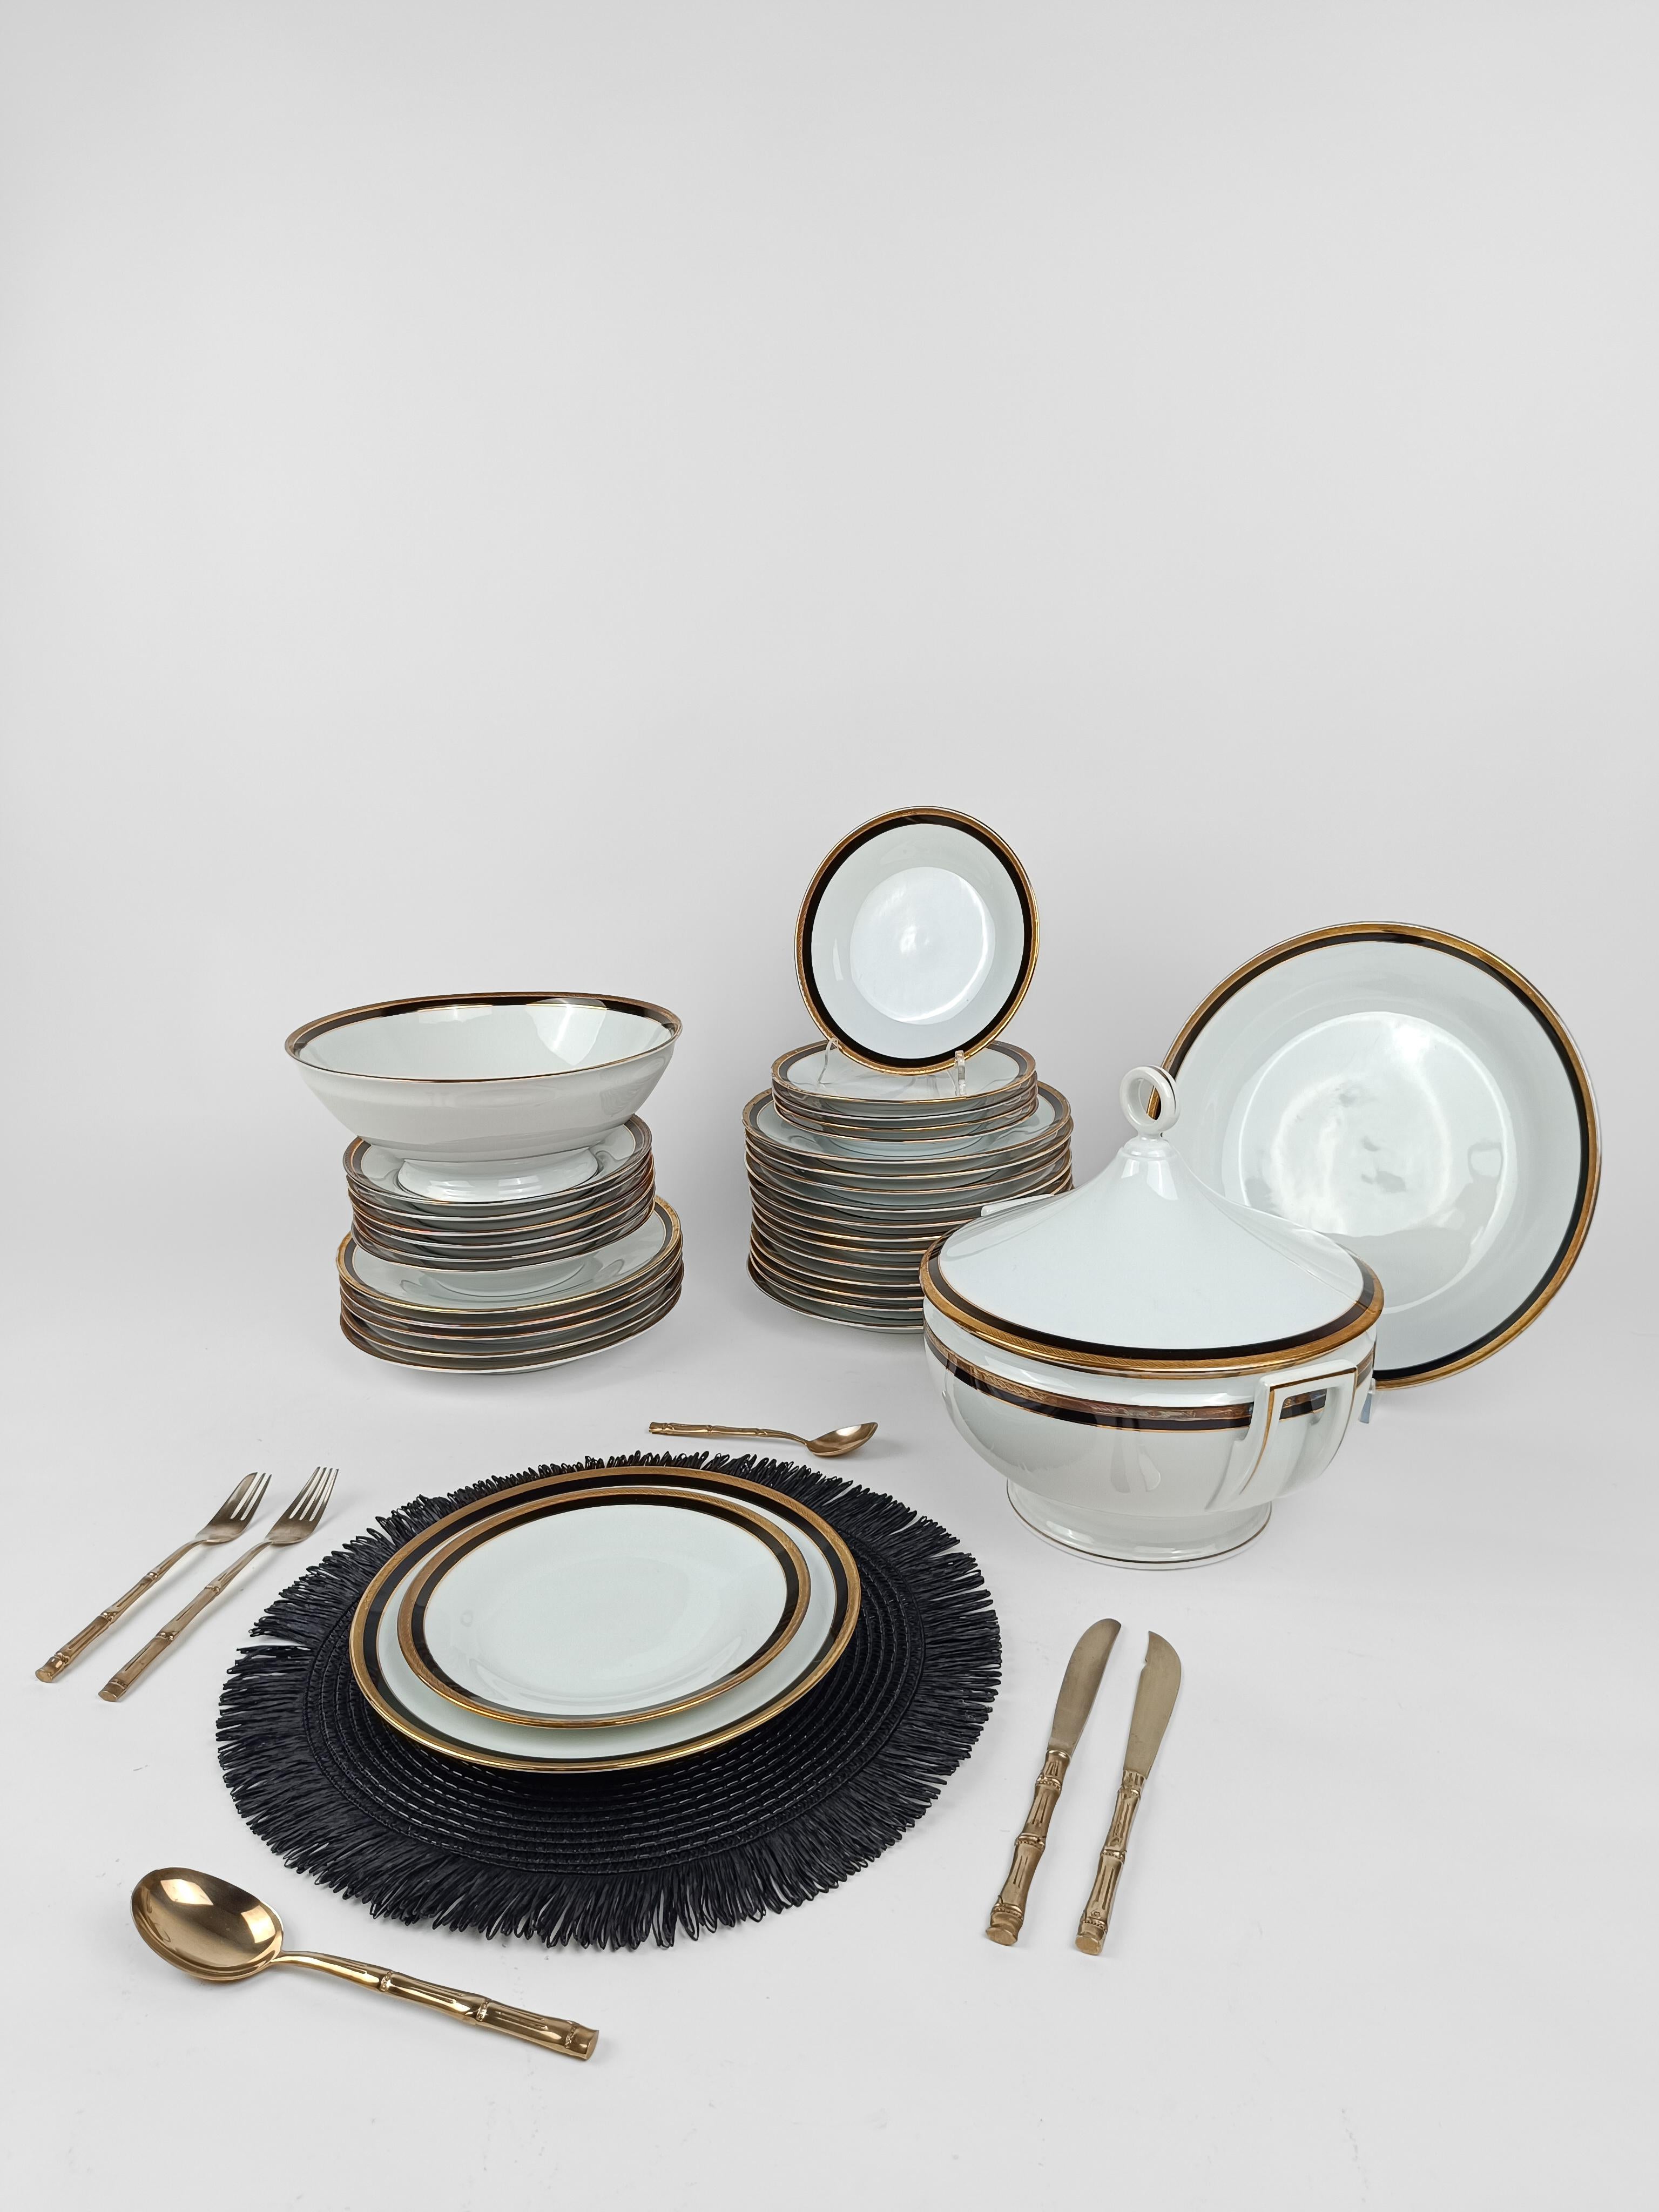 China Dinner Service for 6 by Richard Ginori Black Onice Rim, Gold Trim & Verge For Sale 4